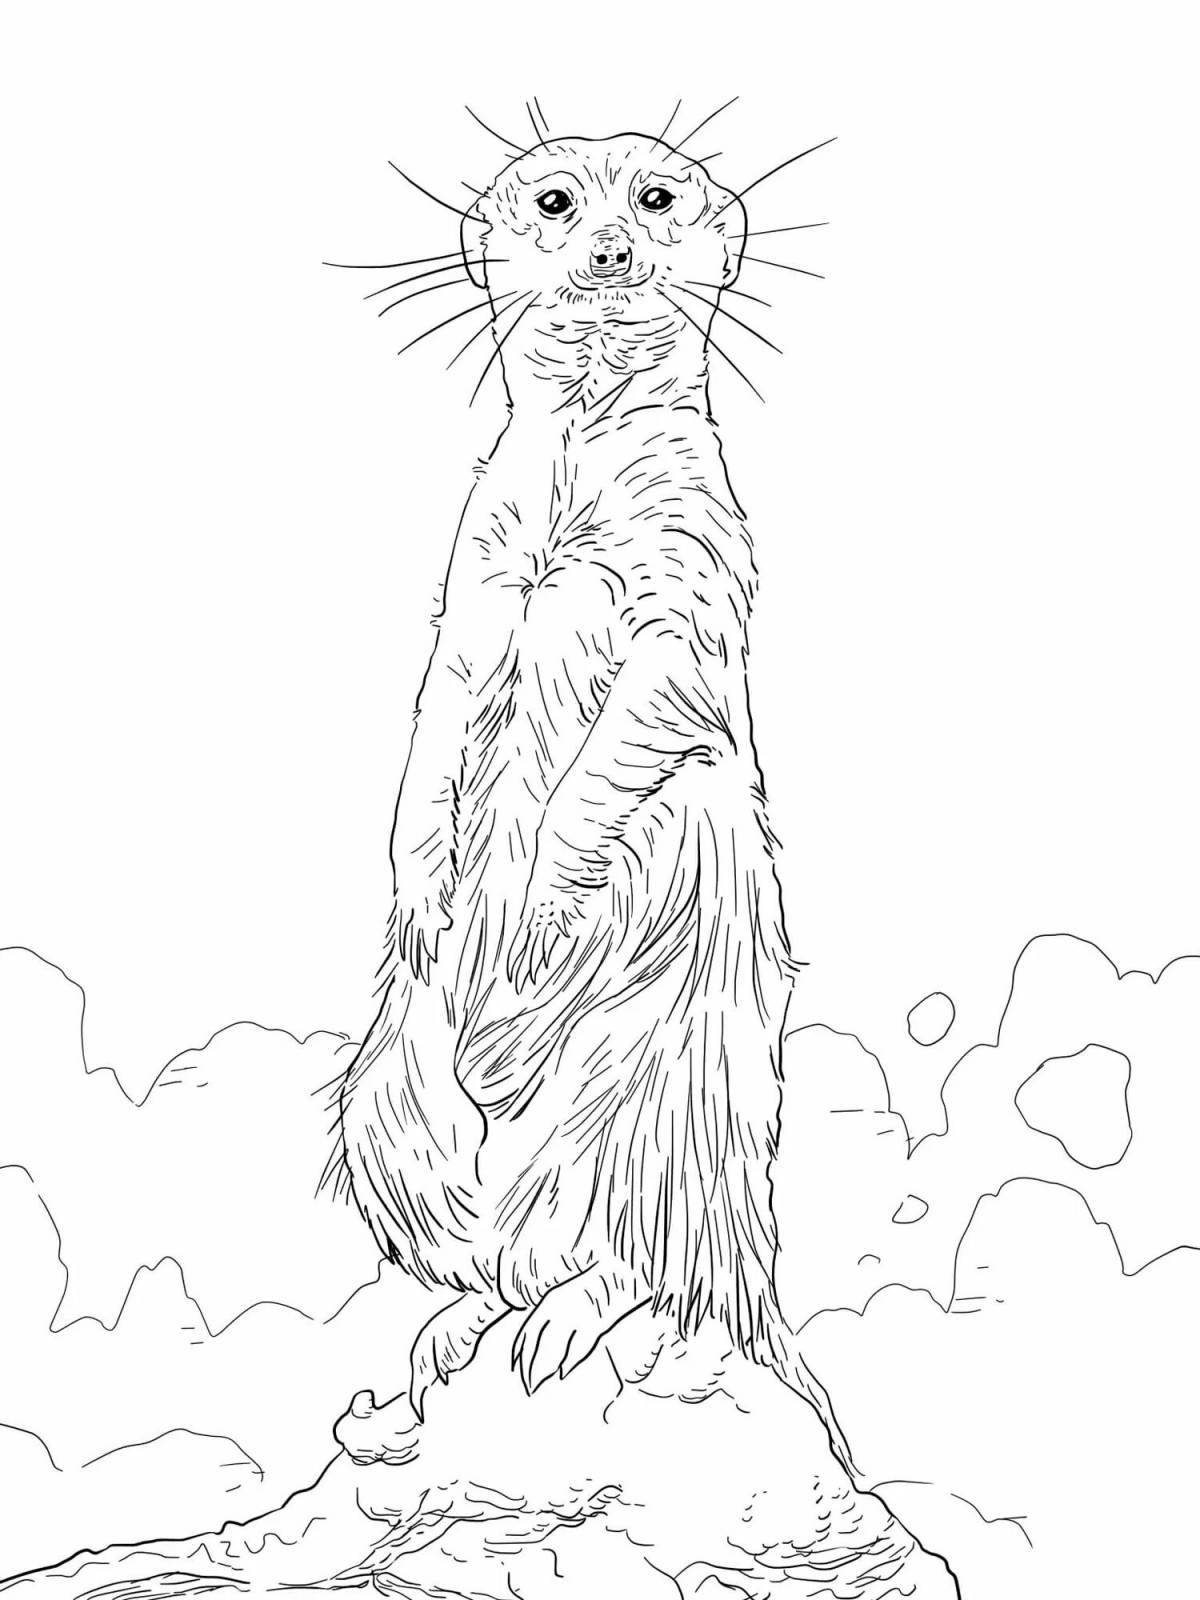 Coloring book playful gopher